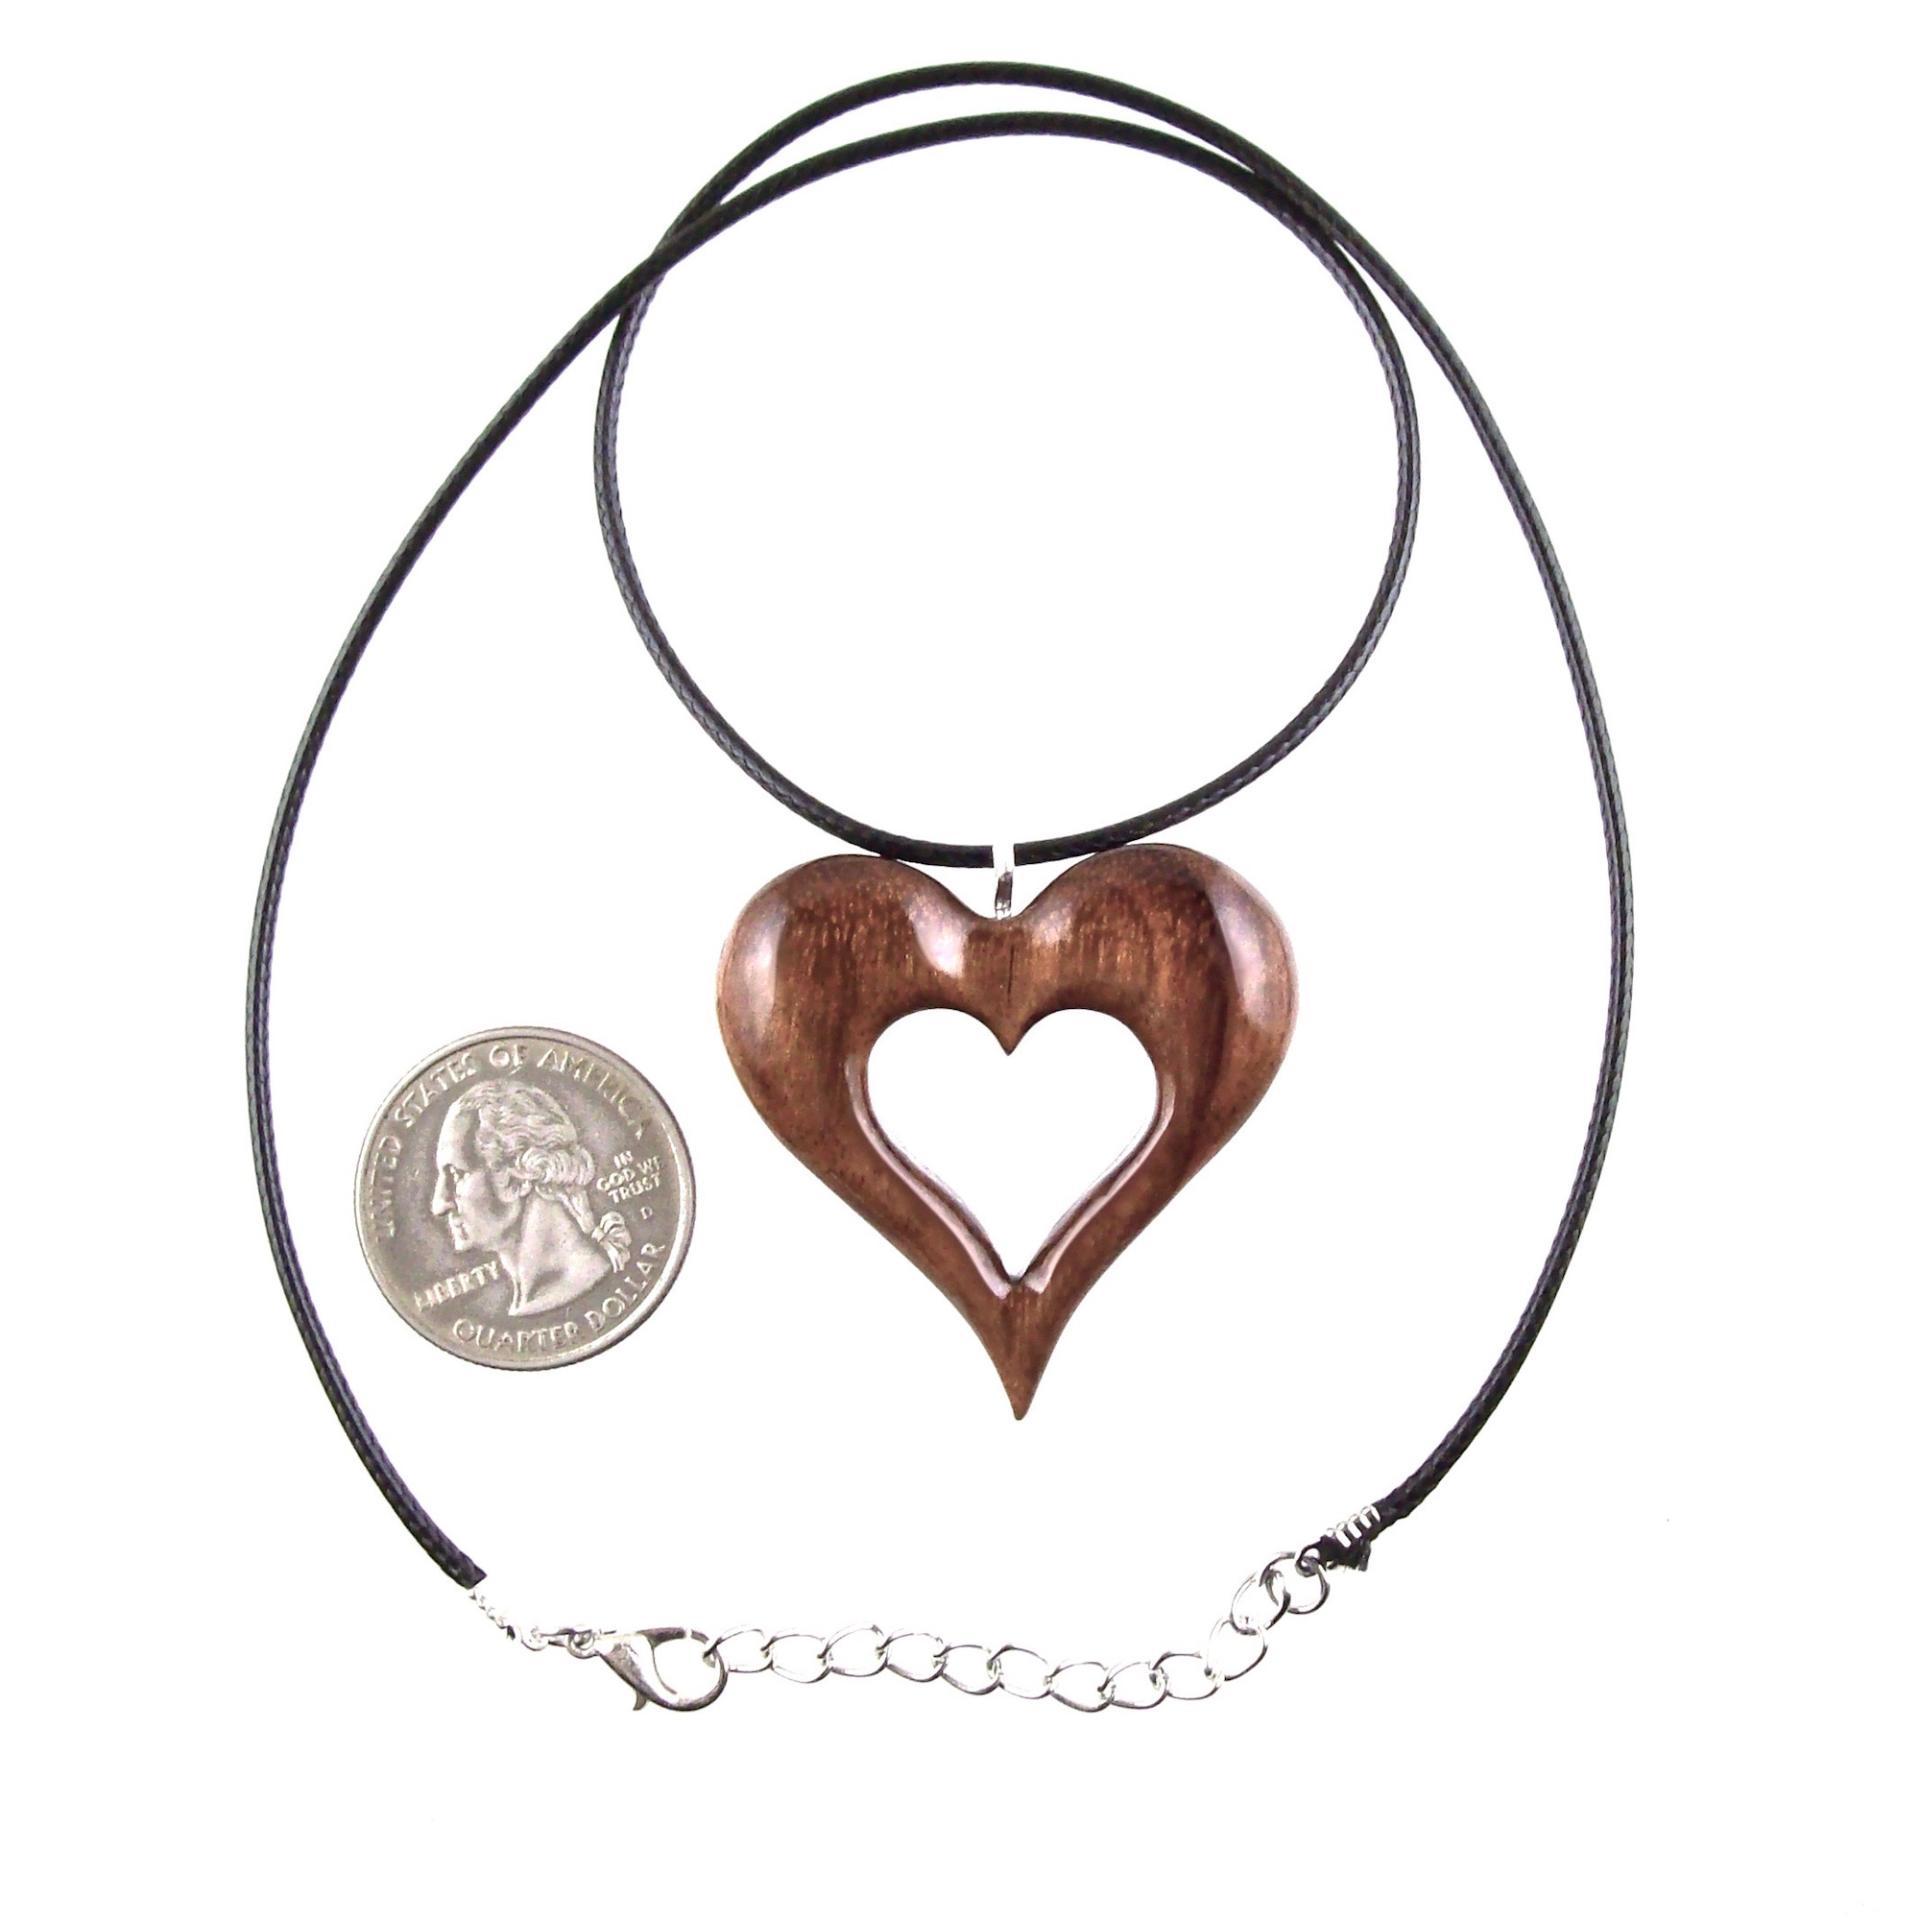 Wood Heart Necklace, Wooden Heart Pendant, Hand Carved 5th Anniversary Gift for Her, One of a Kind Handmade Jewelry